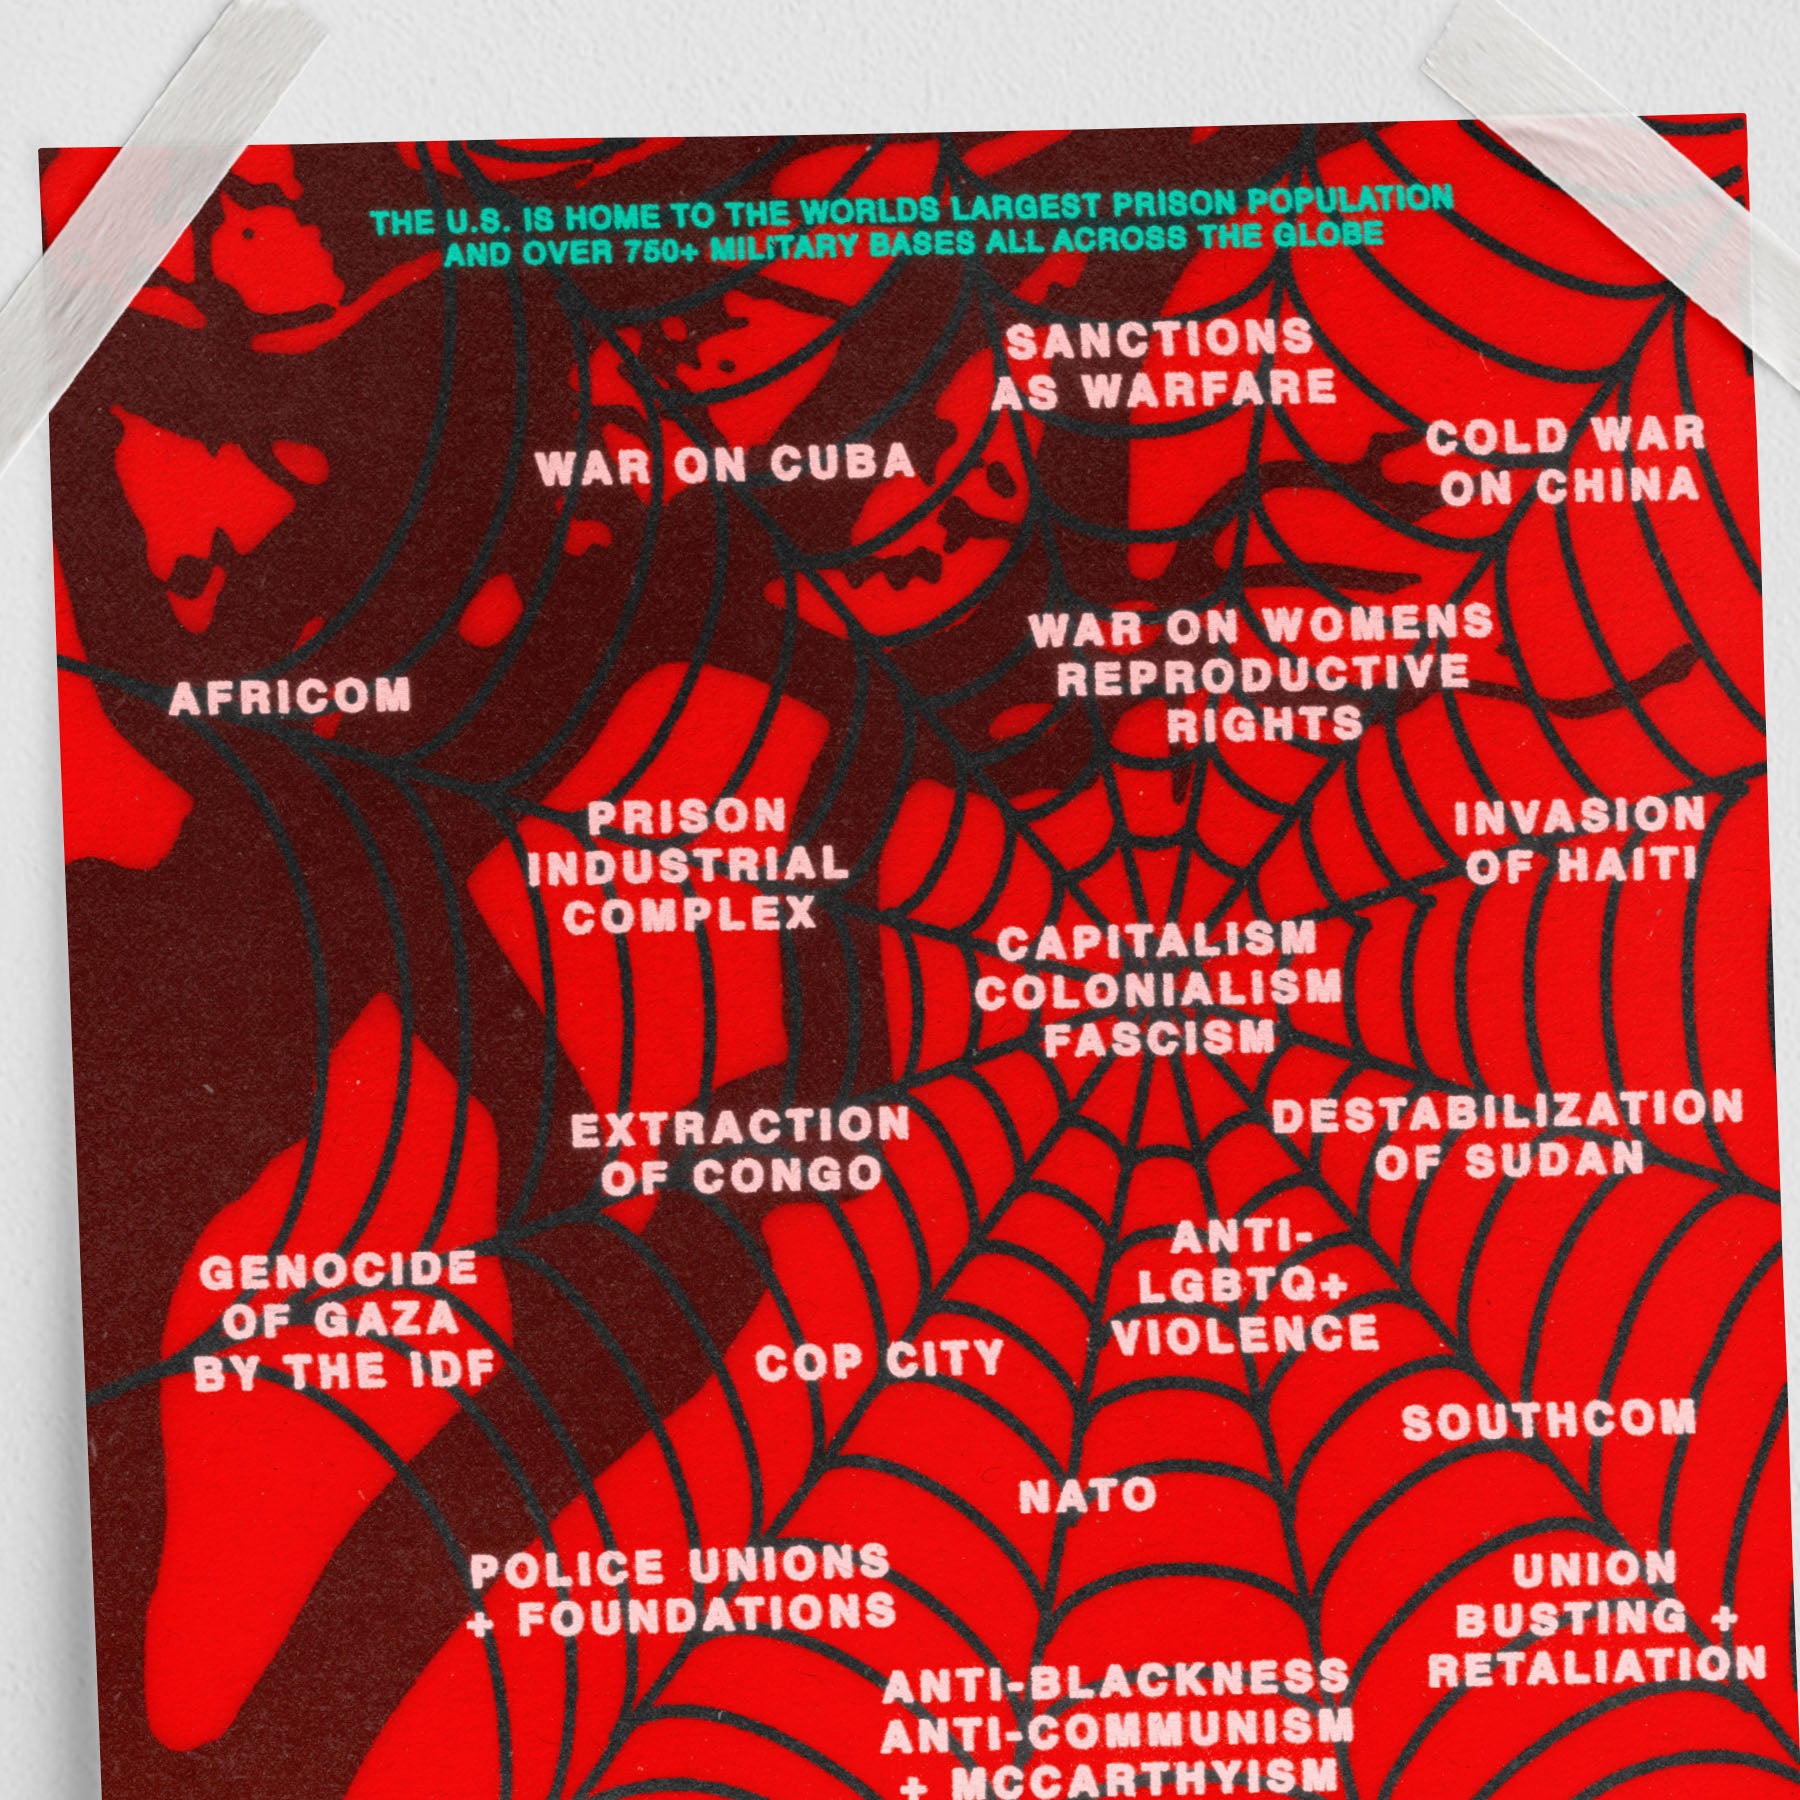 Spider Web of Imperialism (11 x 17 Poster print)